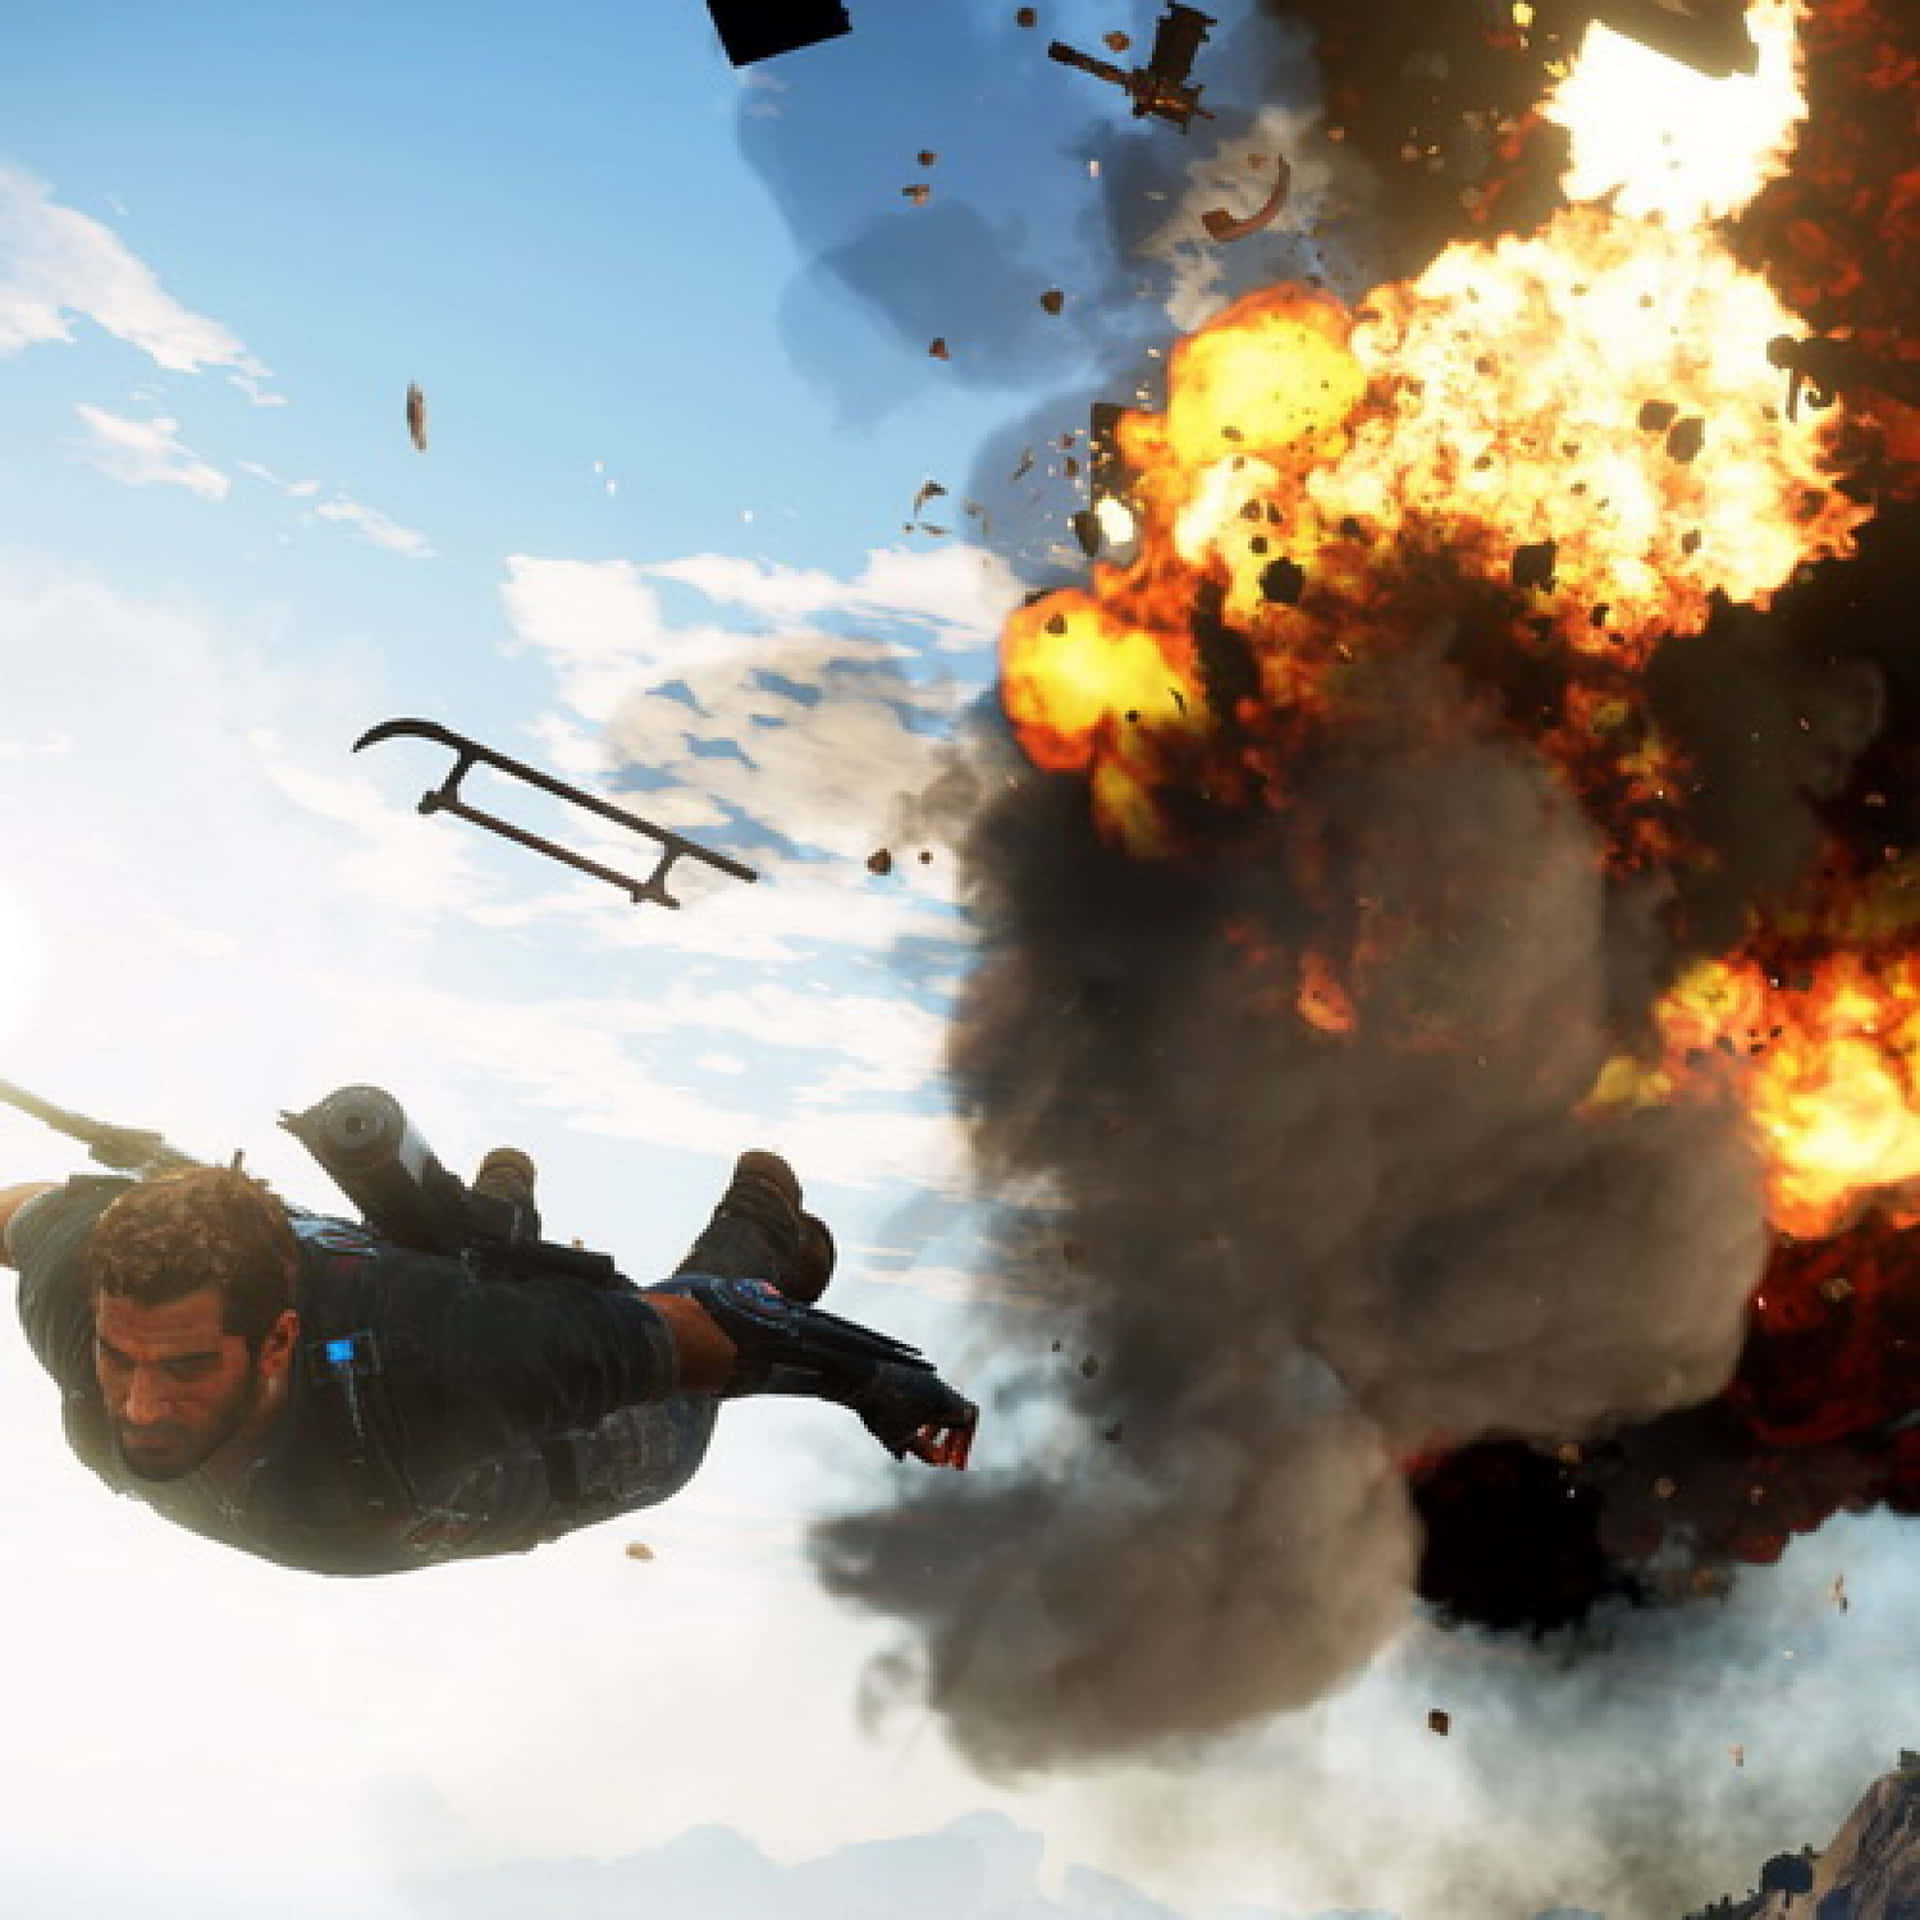 Just Cause3 Explosive Skydive